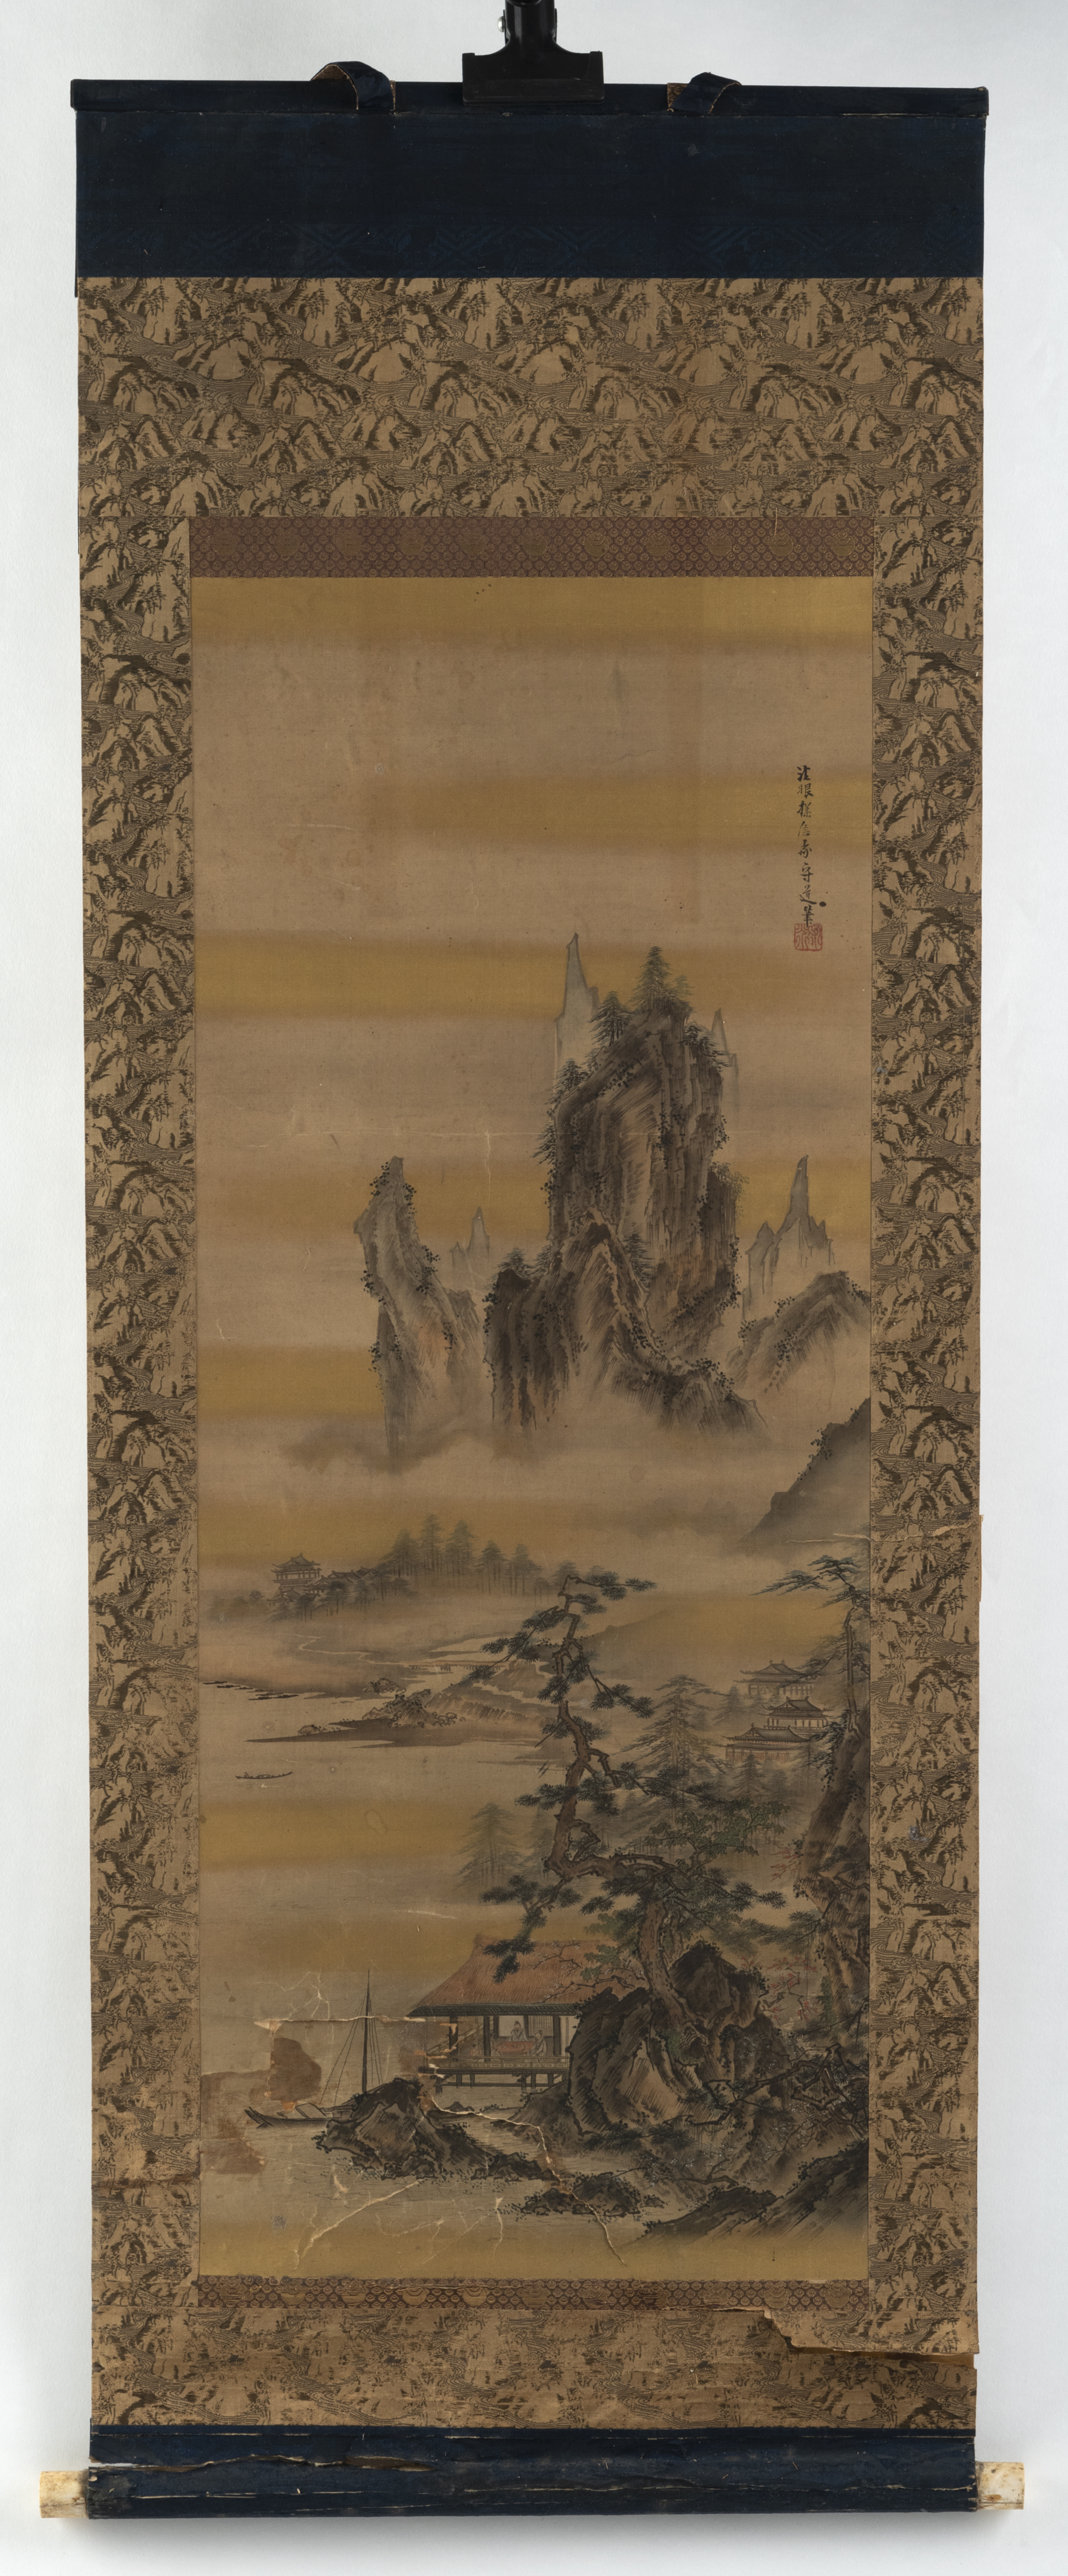 A HANGING SCROLL DEPICTING A LANDSCAPE WITH A SCHOLAR'S SUDIO AFTER KANO TANSHIN. INK AND COLORS ON - Image 2 of 3